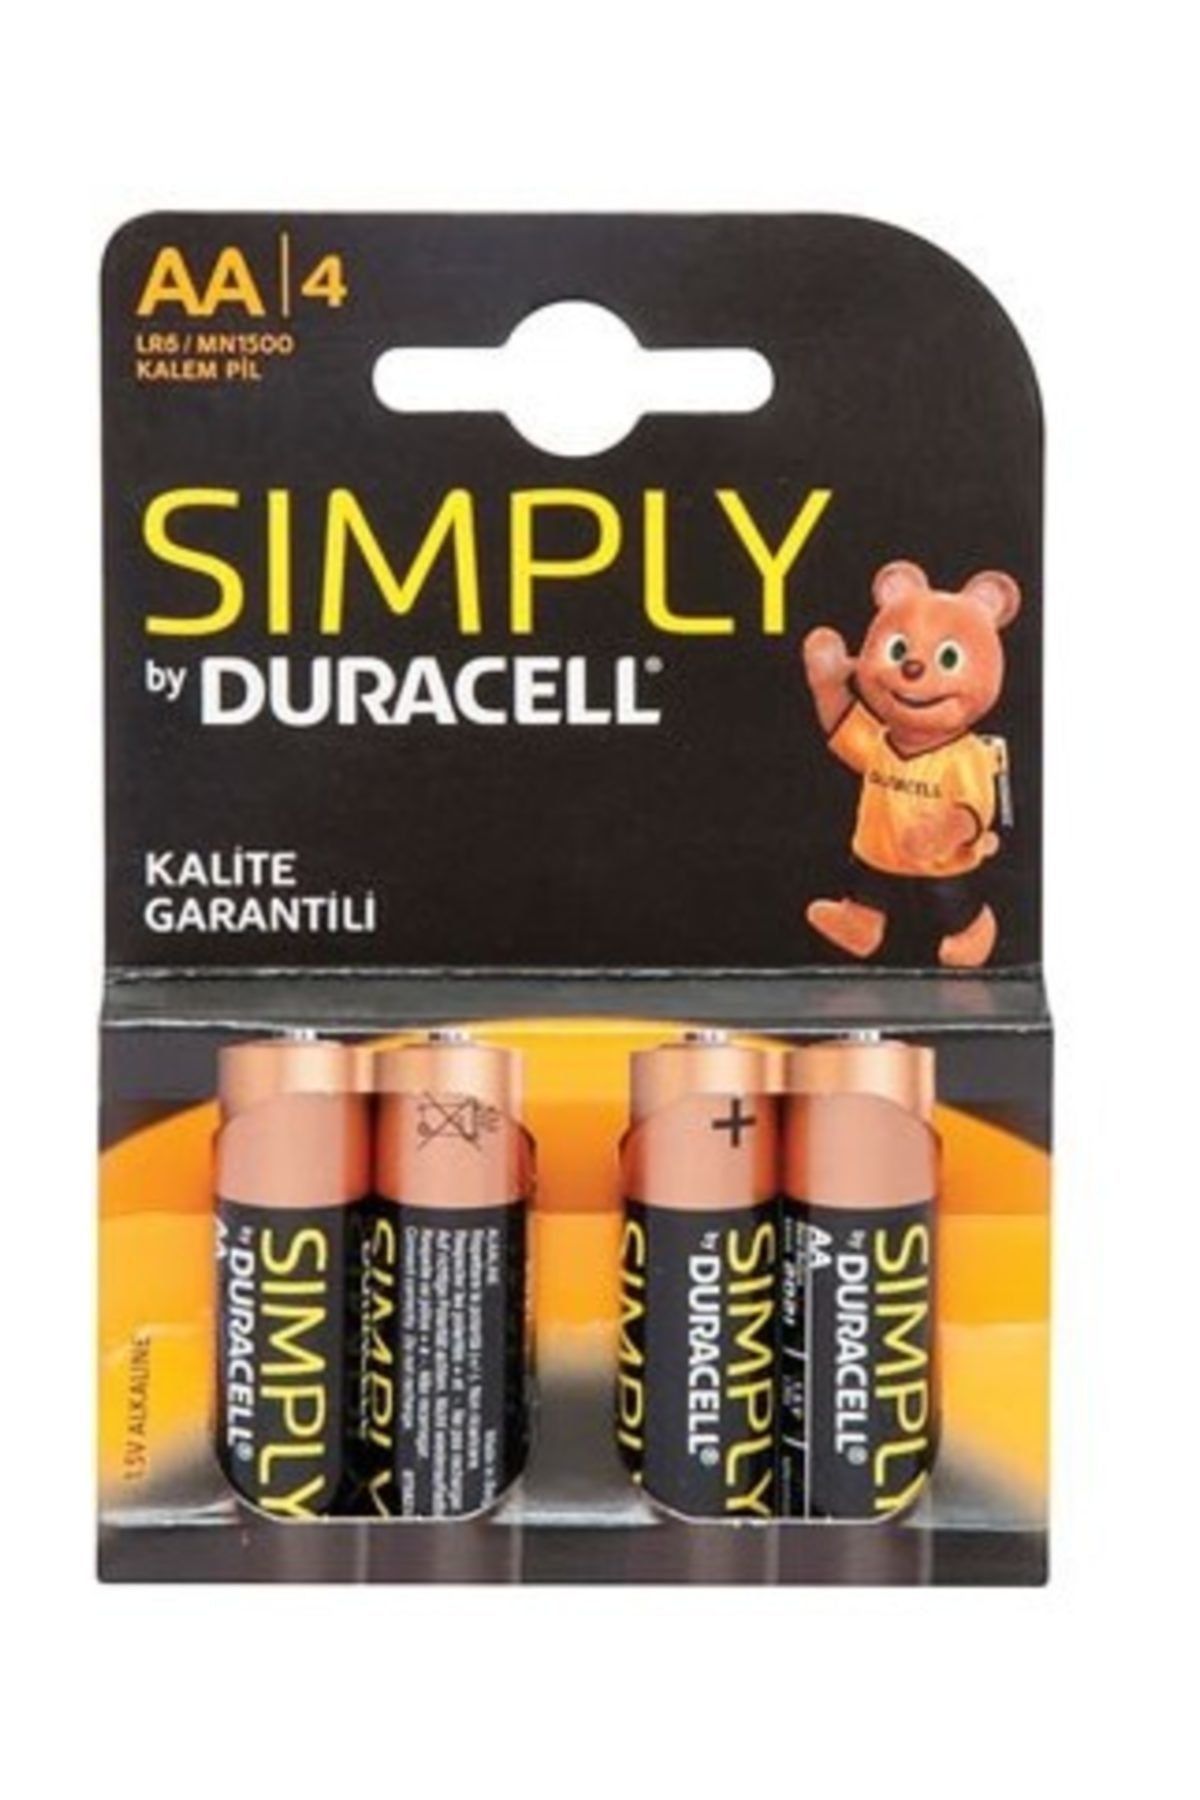 Duracell simply. Duracell simply AA.